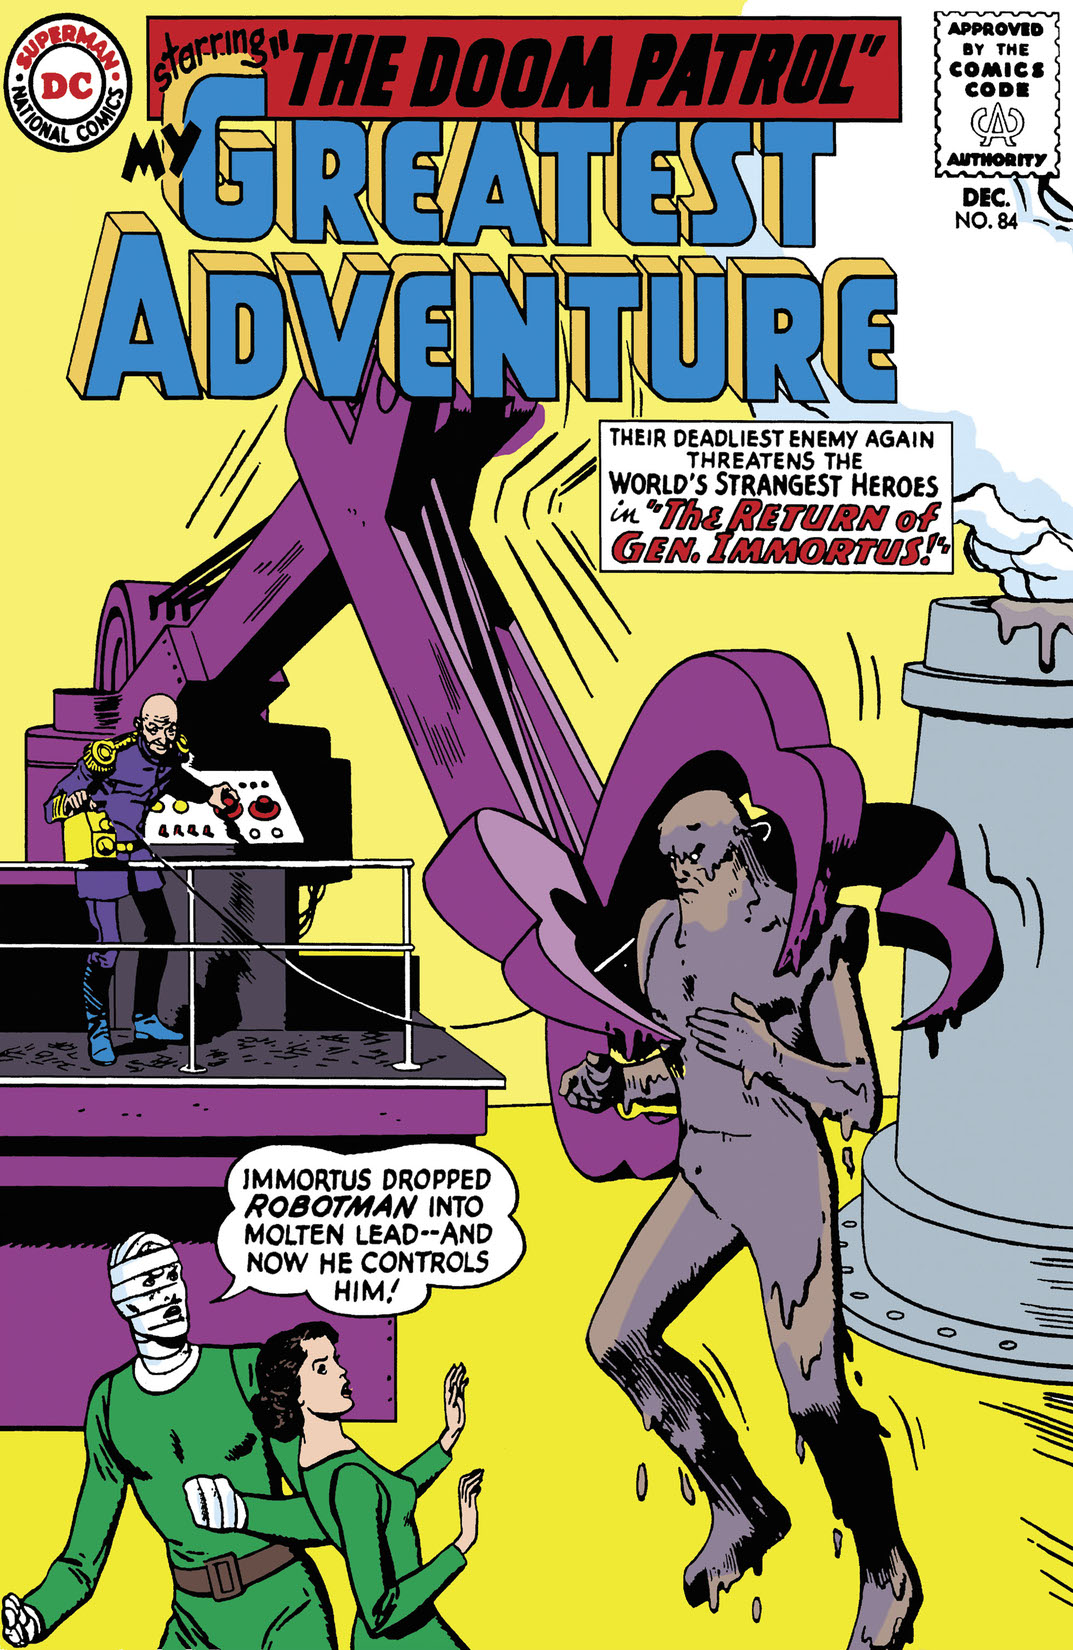 My Greatest Adventure (1955-) #84 preview images